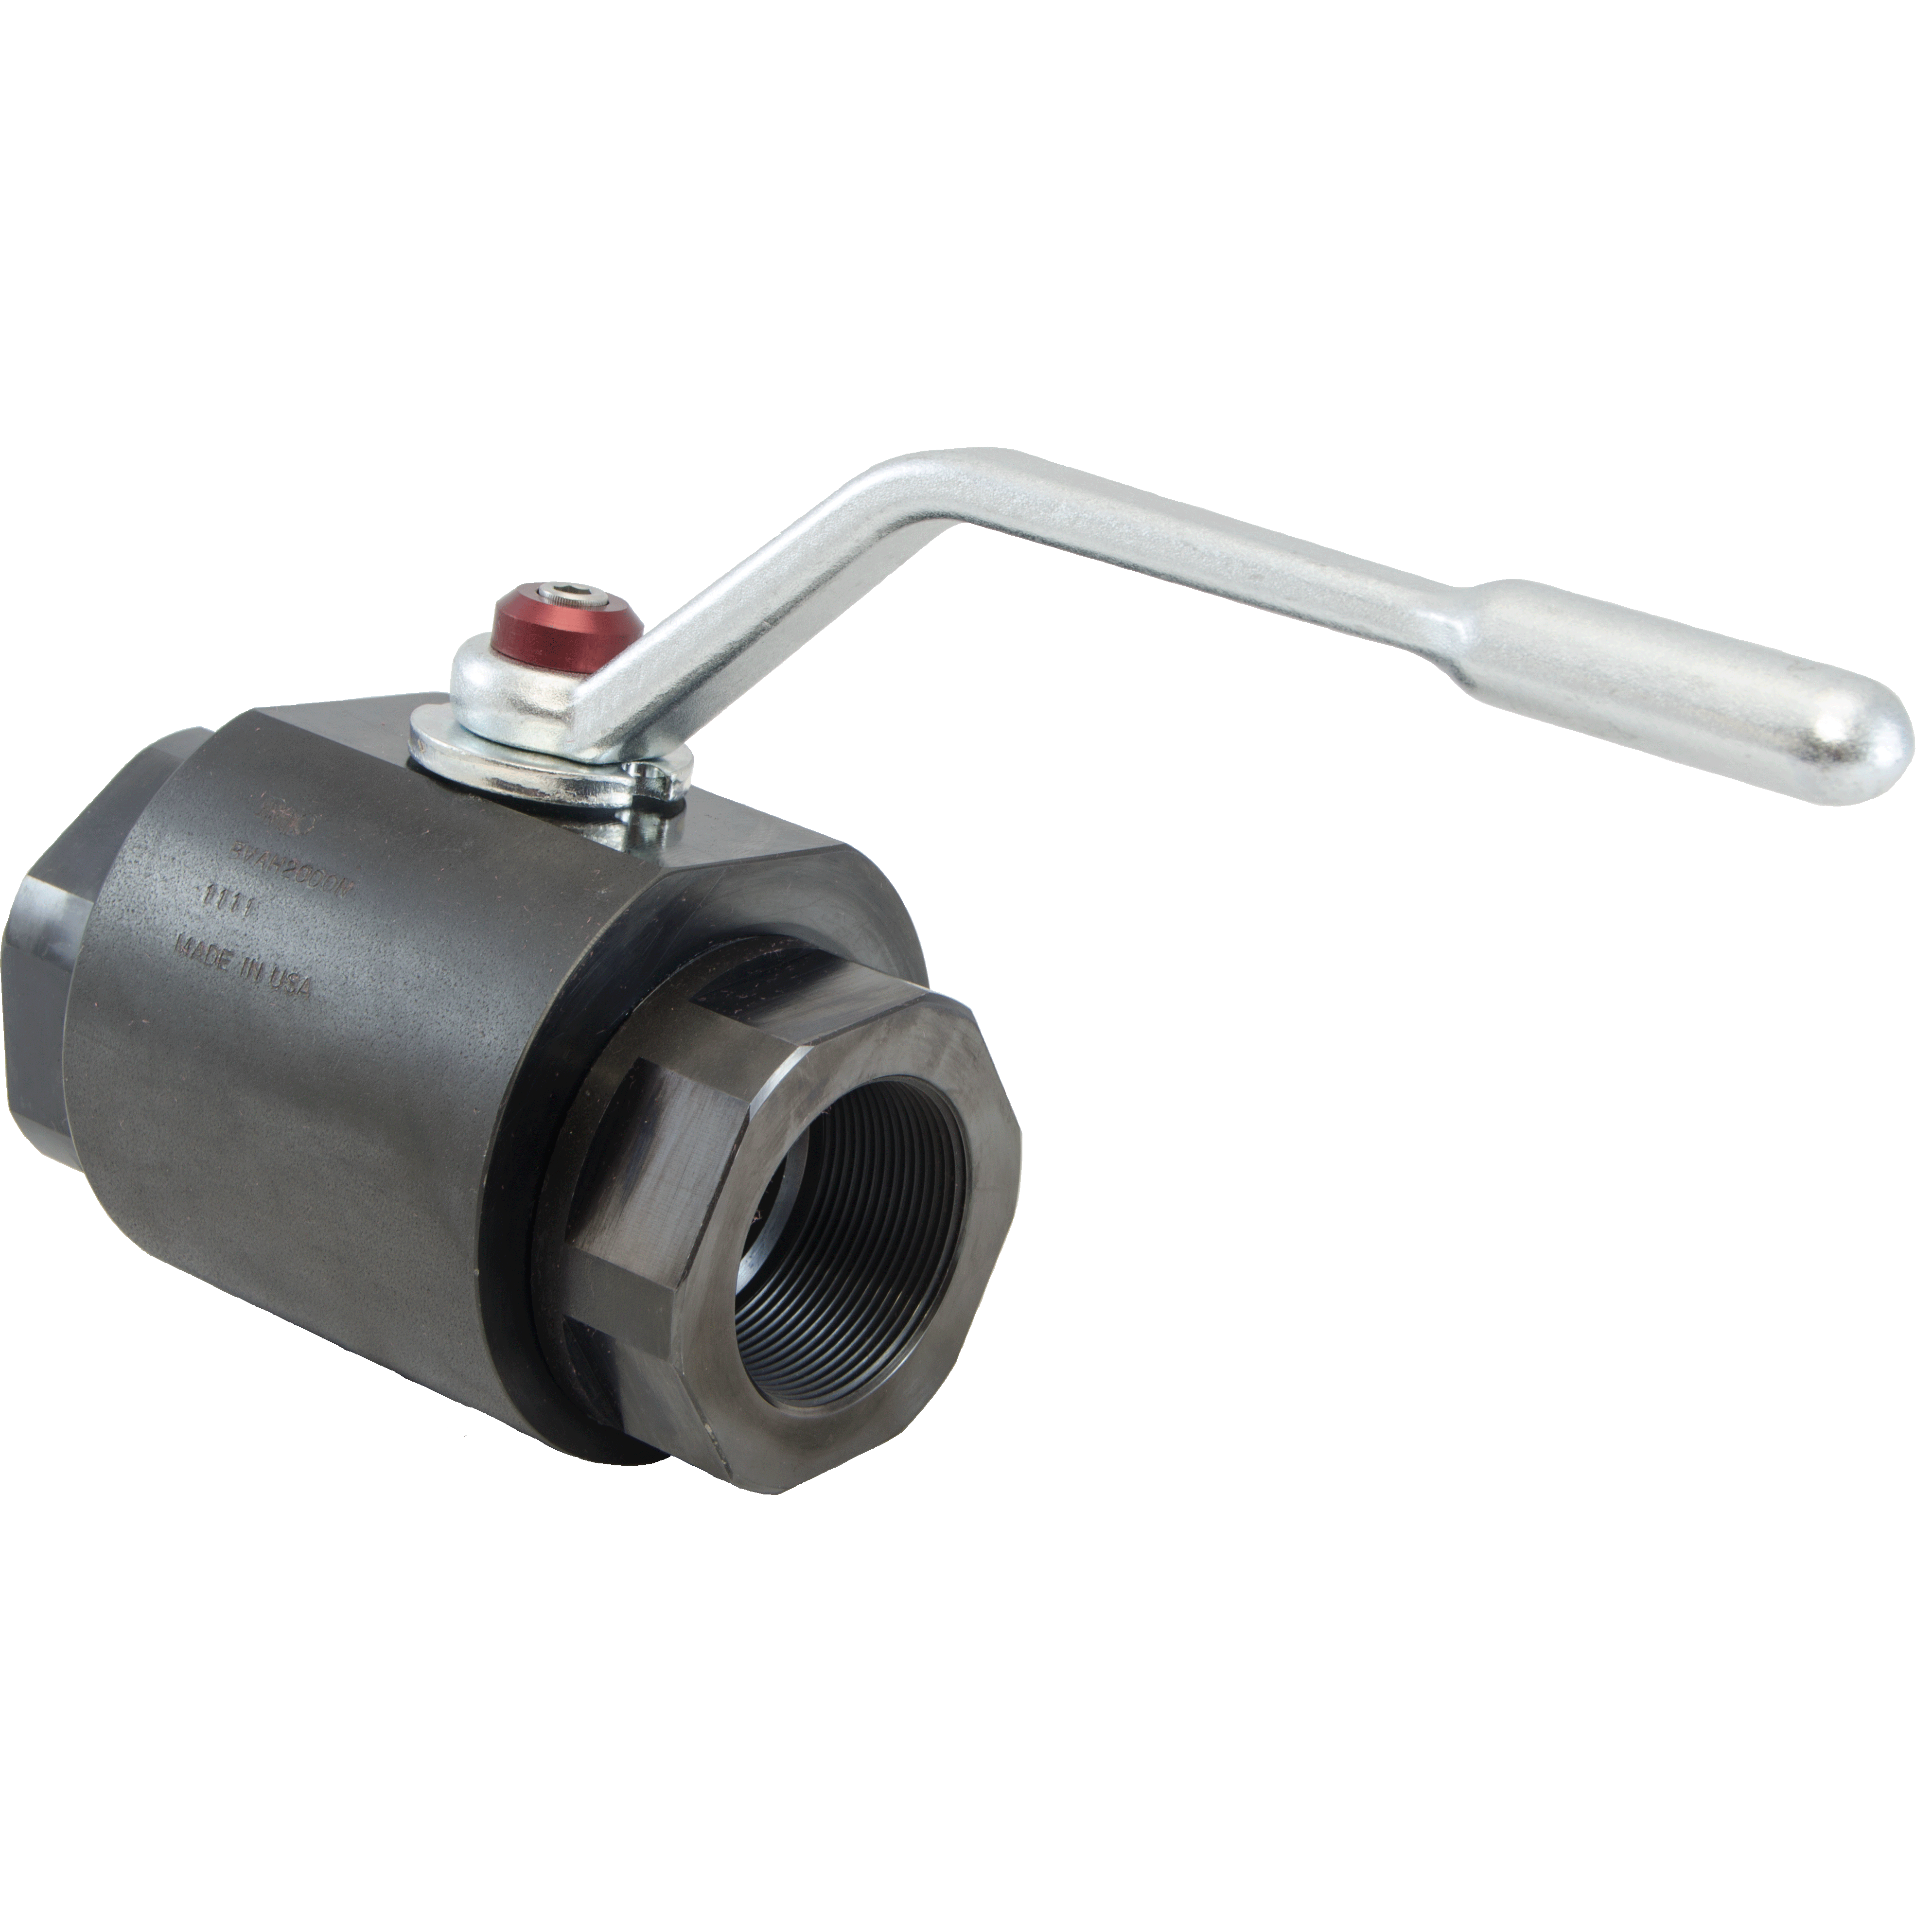 BVAH-2000S-1111 : DMIC Round Body Ball Valve, #32 SAE (2), Carbon Steel, 6000psi, Two-Way